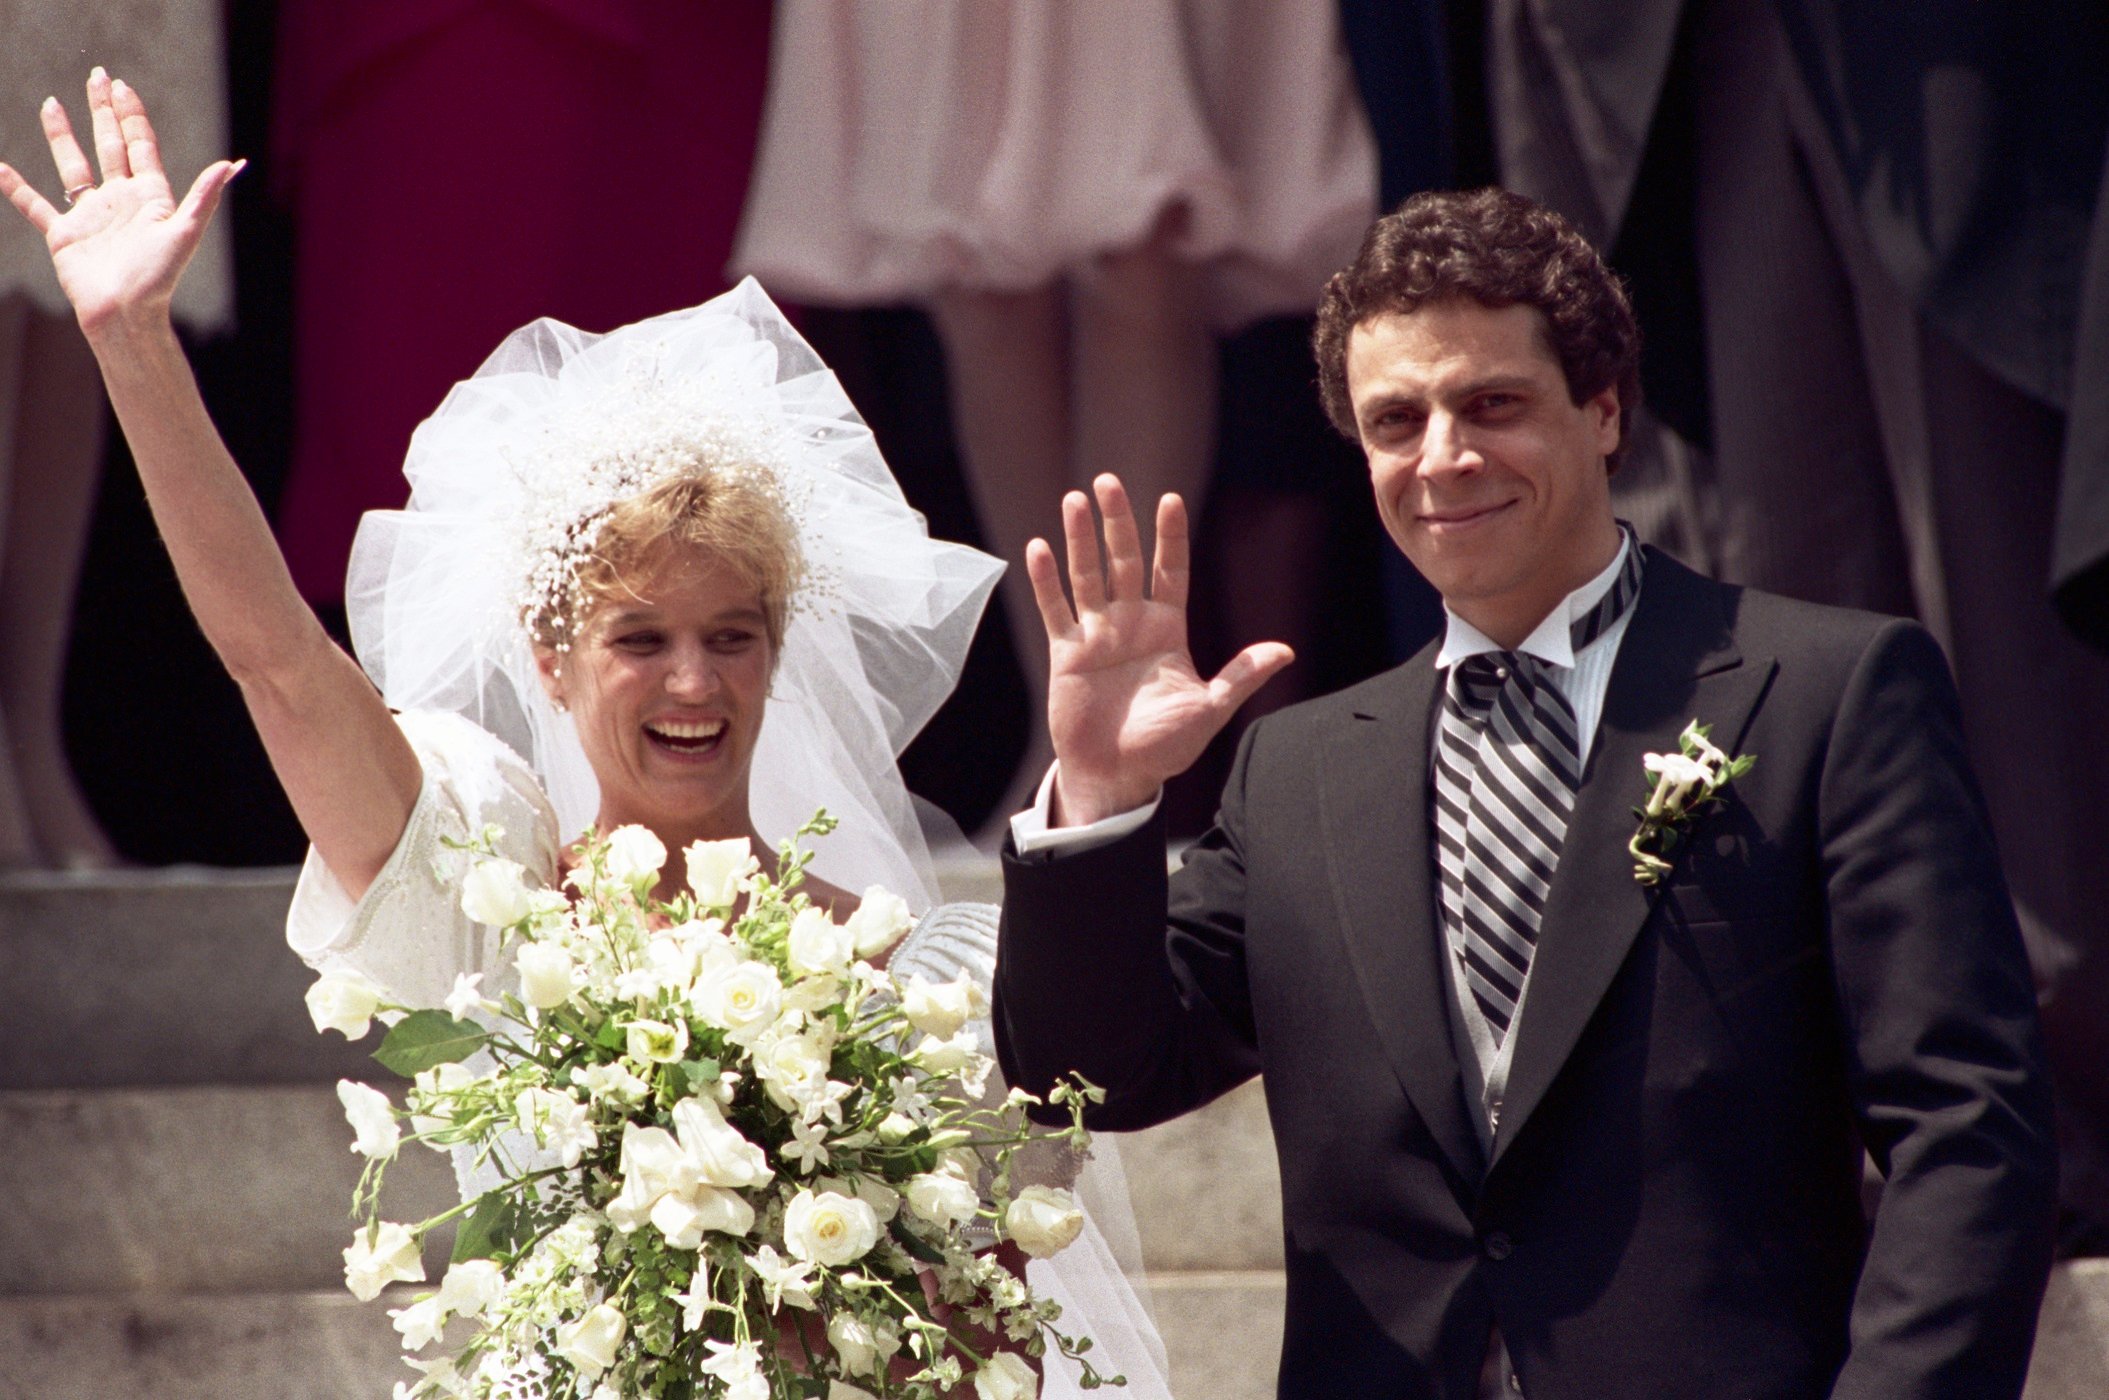 Kerry Kennedy and Andrew Cuomo on their wedding day in 1990 at St. Matthew's Cathedral in Washington D.C.